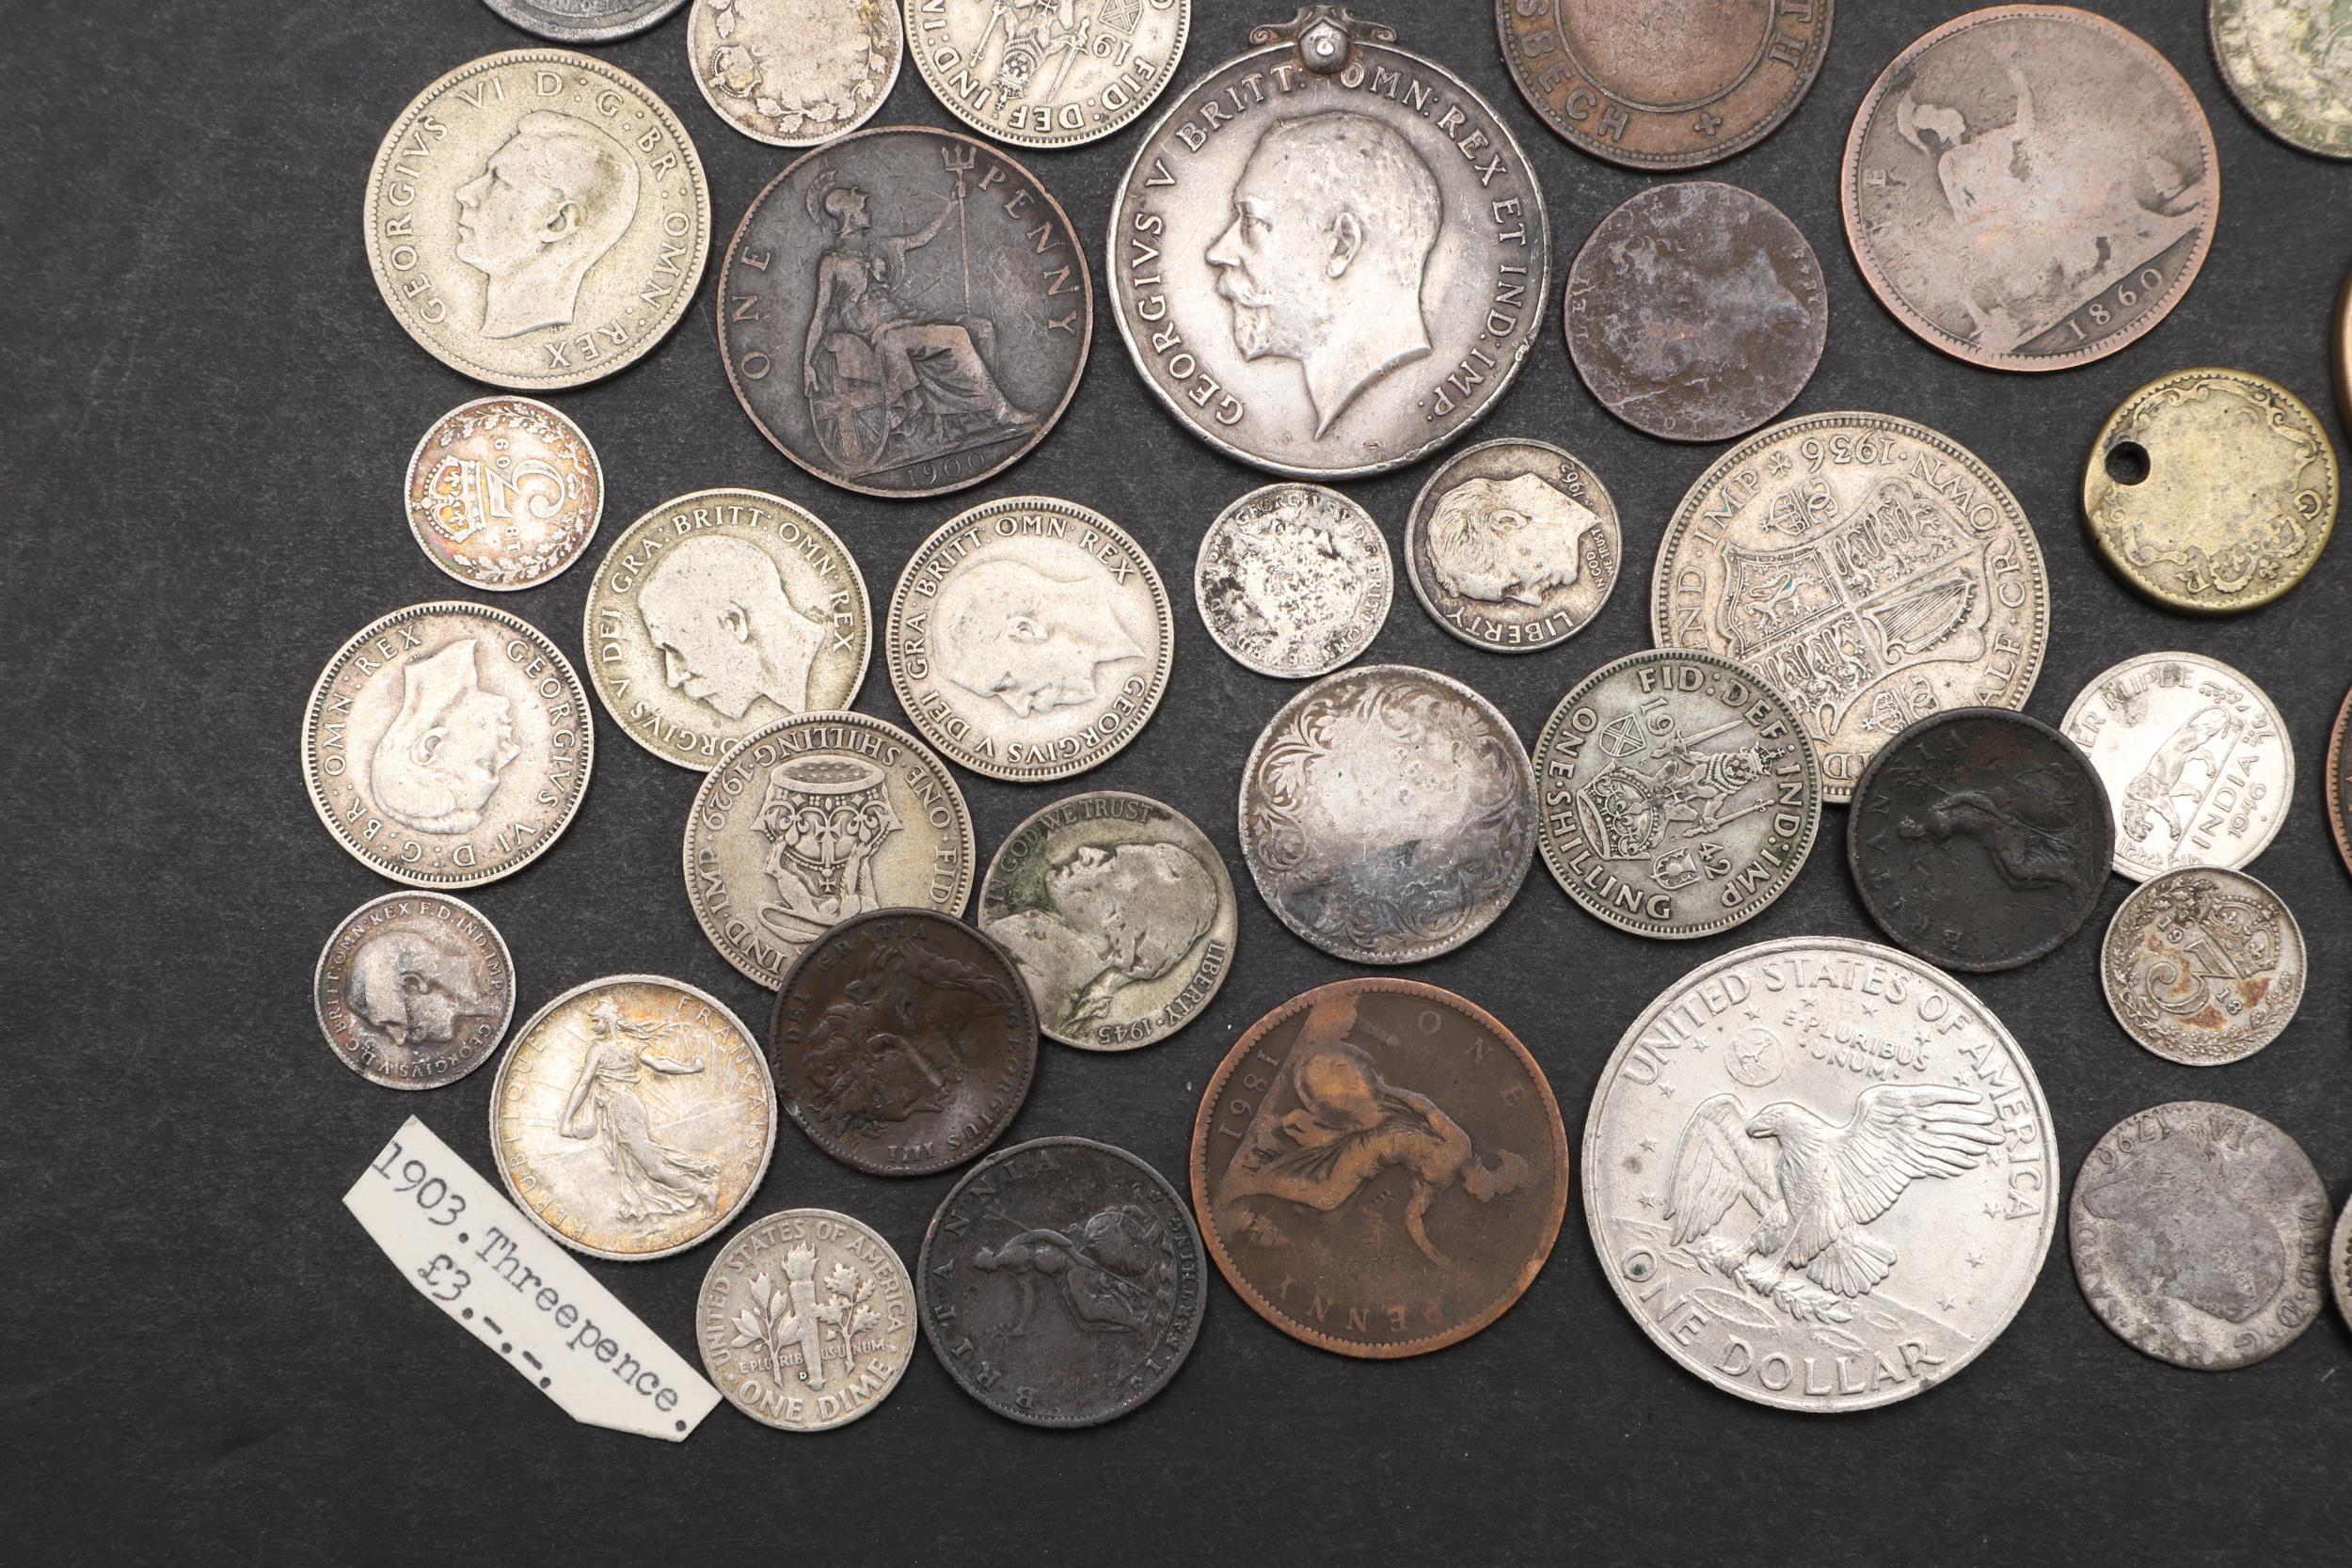 A MIXED COLLECTION OF WORLD COINS AND A GREAT WAR MEDAL. - Image 4 of 5